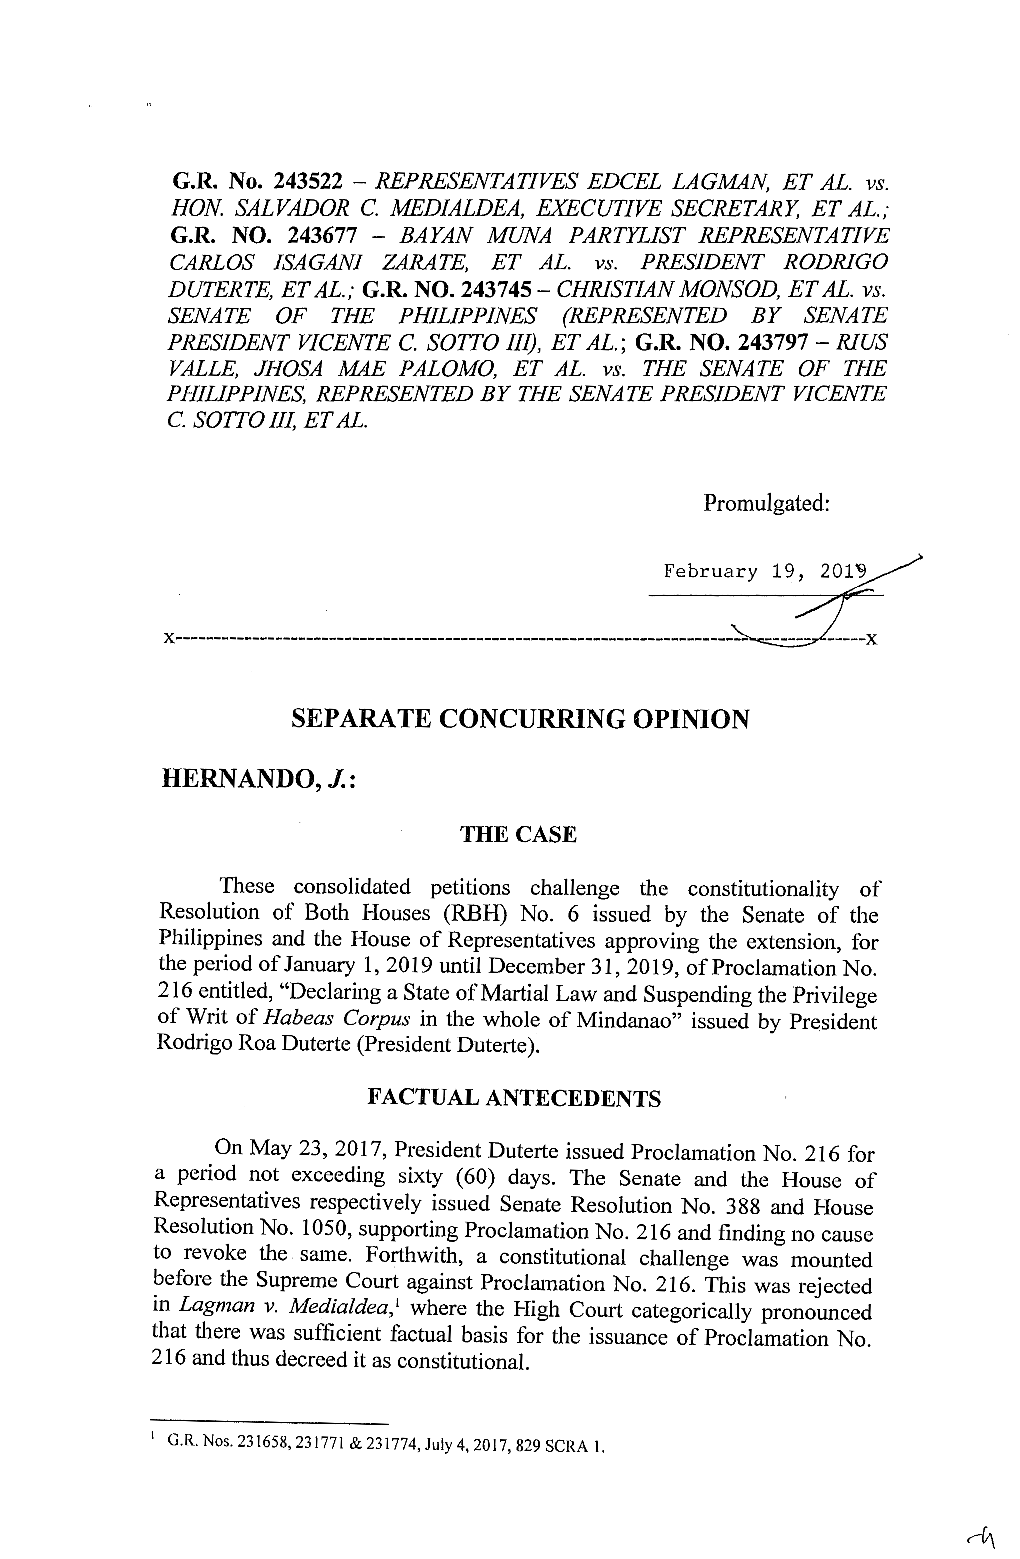 Separate Concurring Opinion Hernando